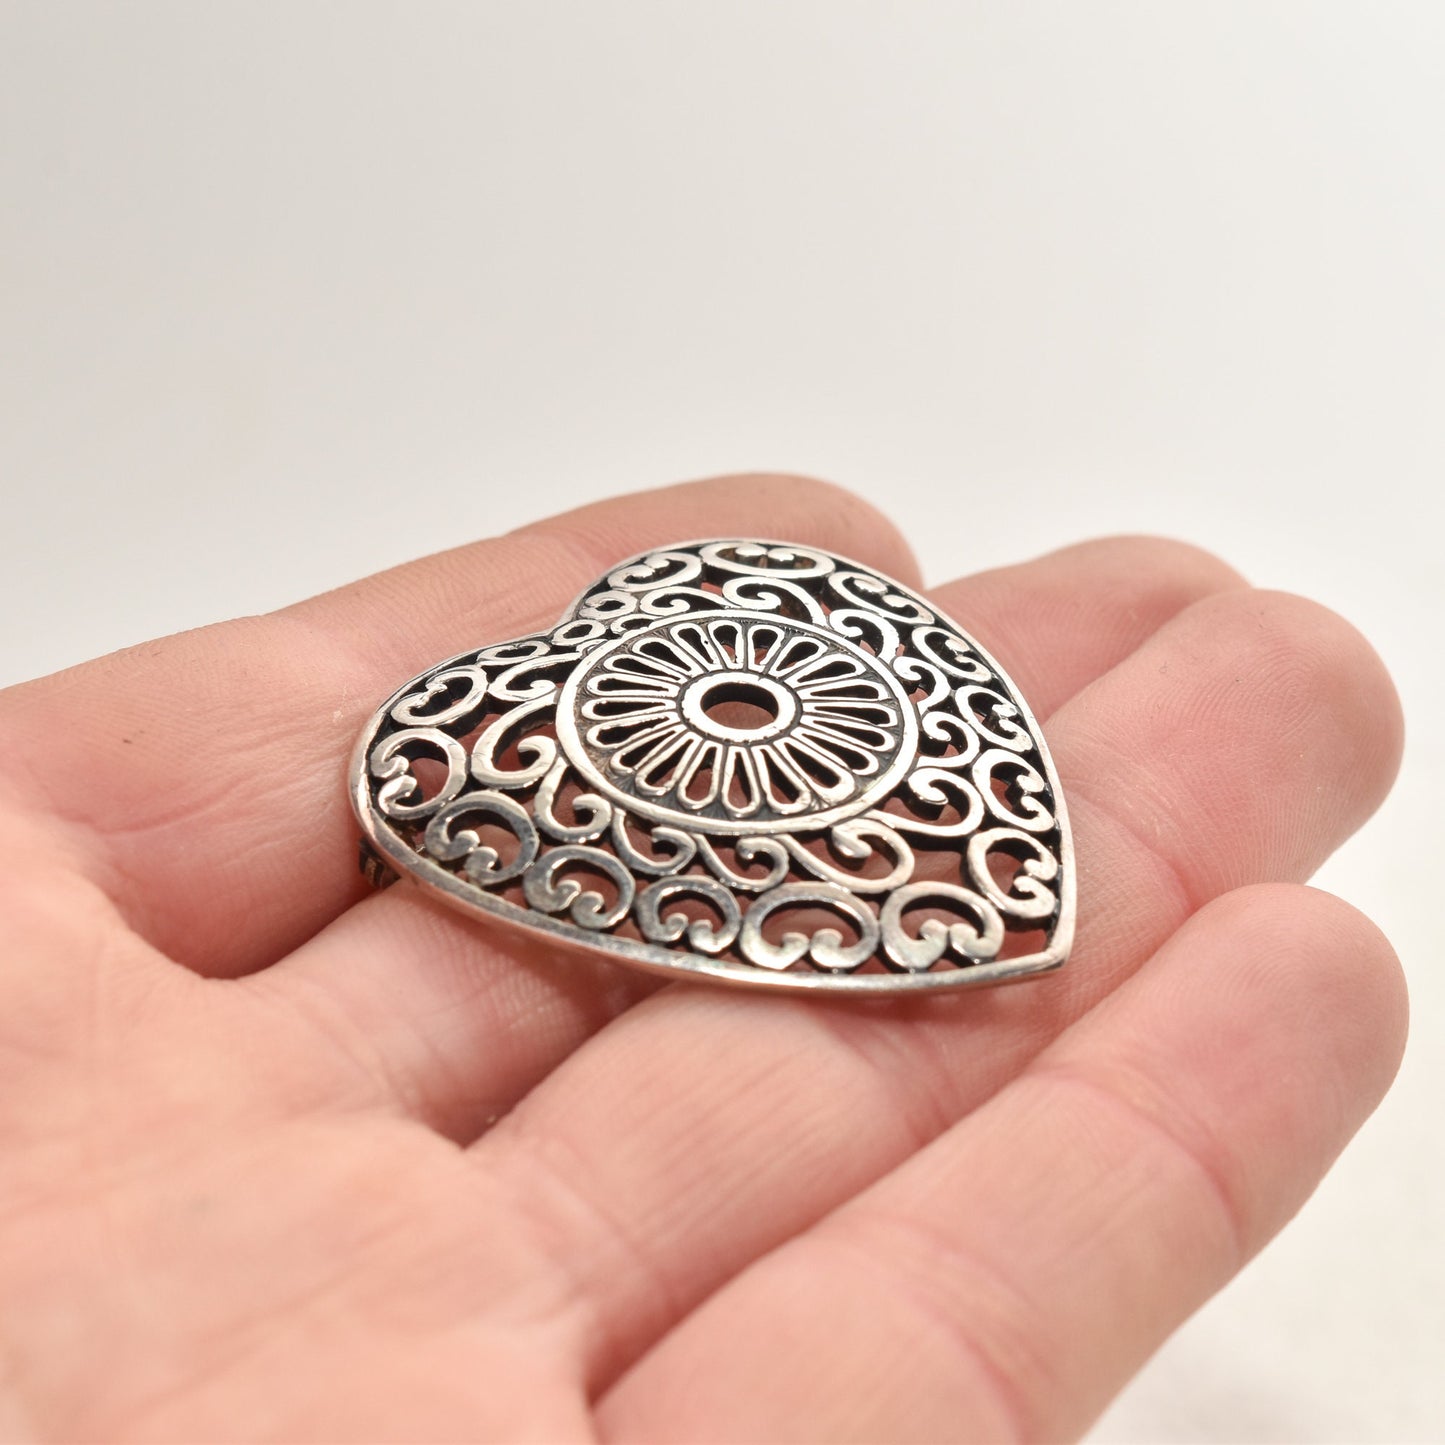 Ornate Sterling Silver Filigree Heart Brooch, Cute Openwork Heart Pin, Valentines Day Gift, 1.5"